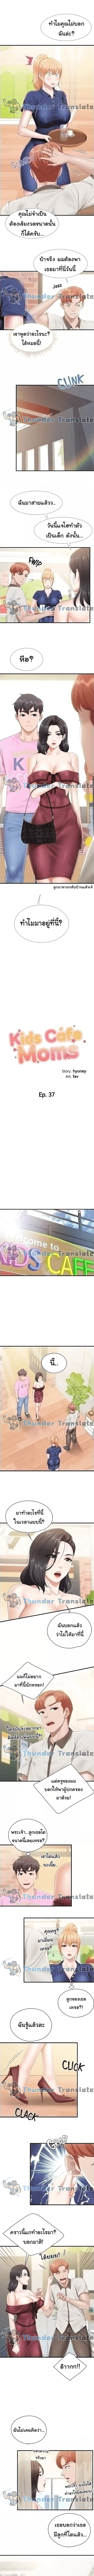 Welcome To Kids Cafe 37 (1)